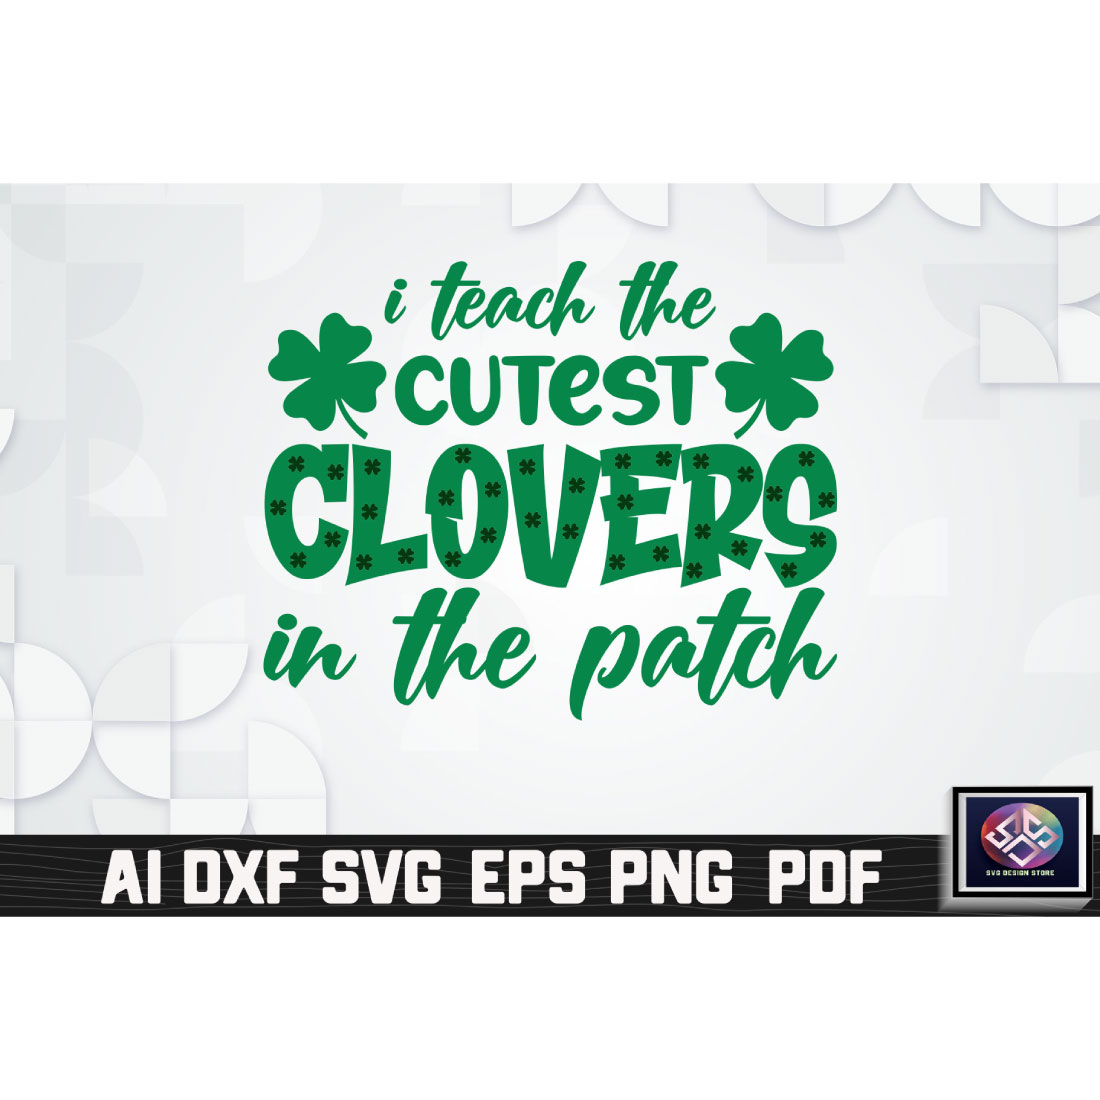 I Teach The Cutest Clovers In The Patch cover image.